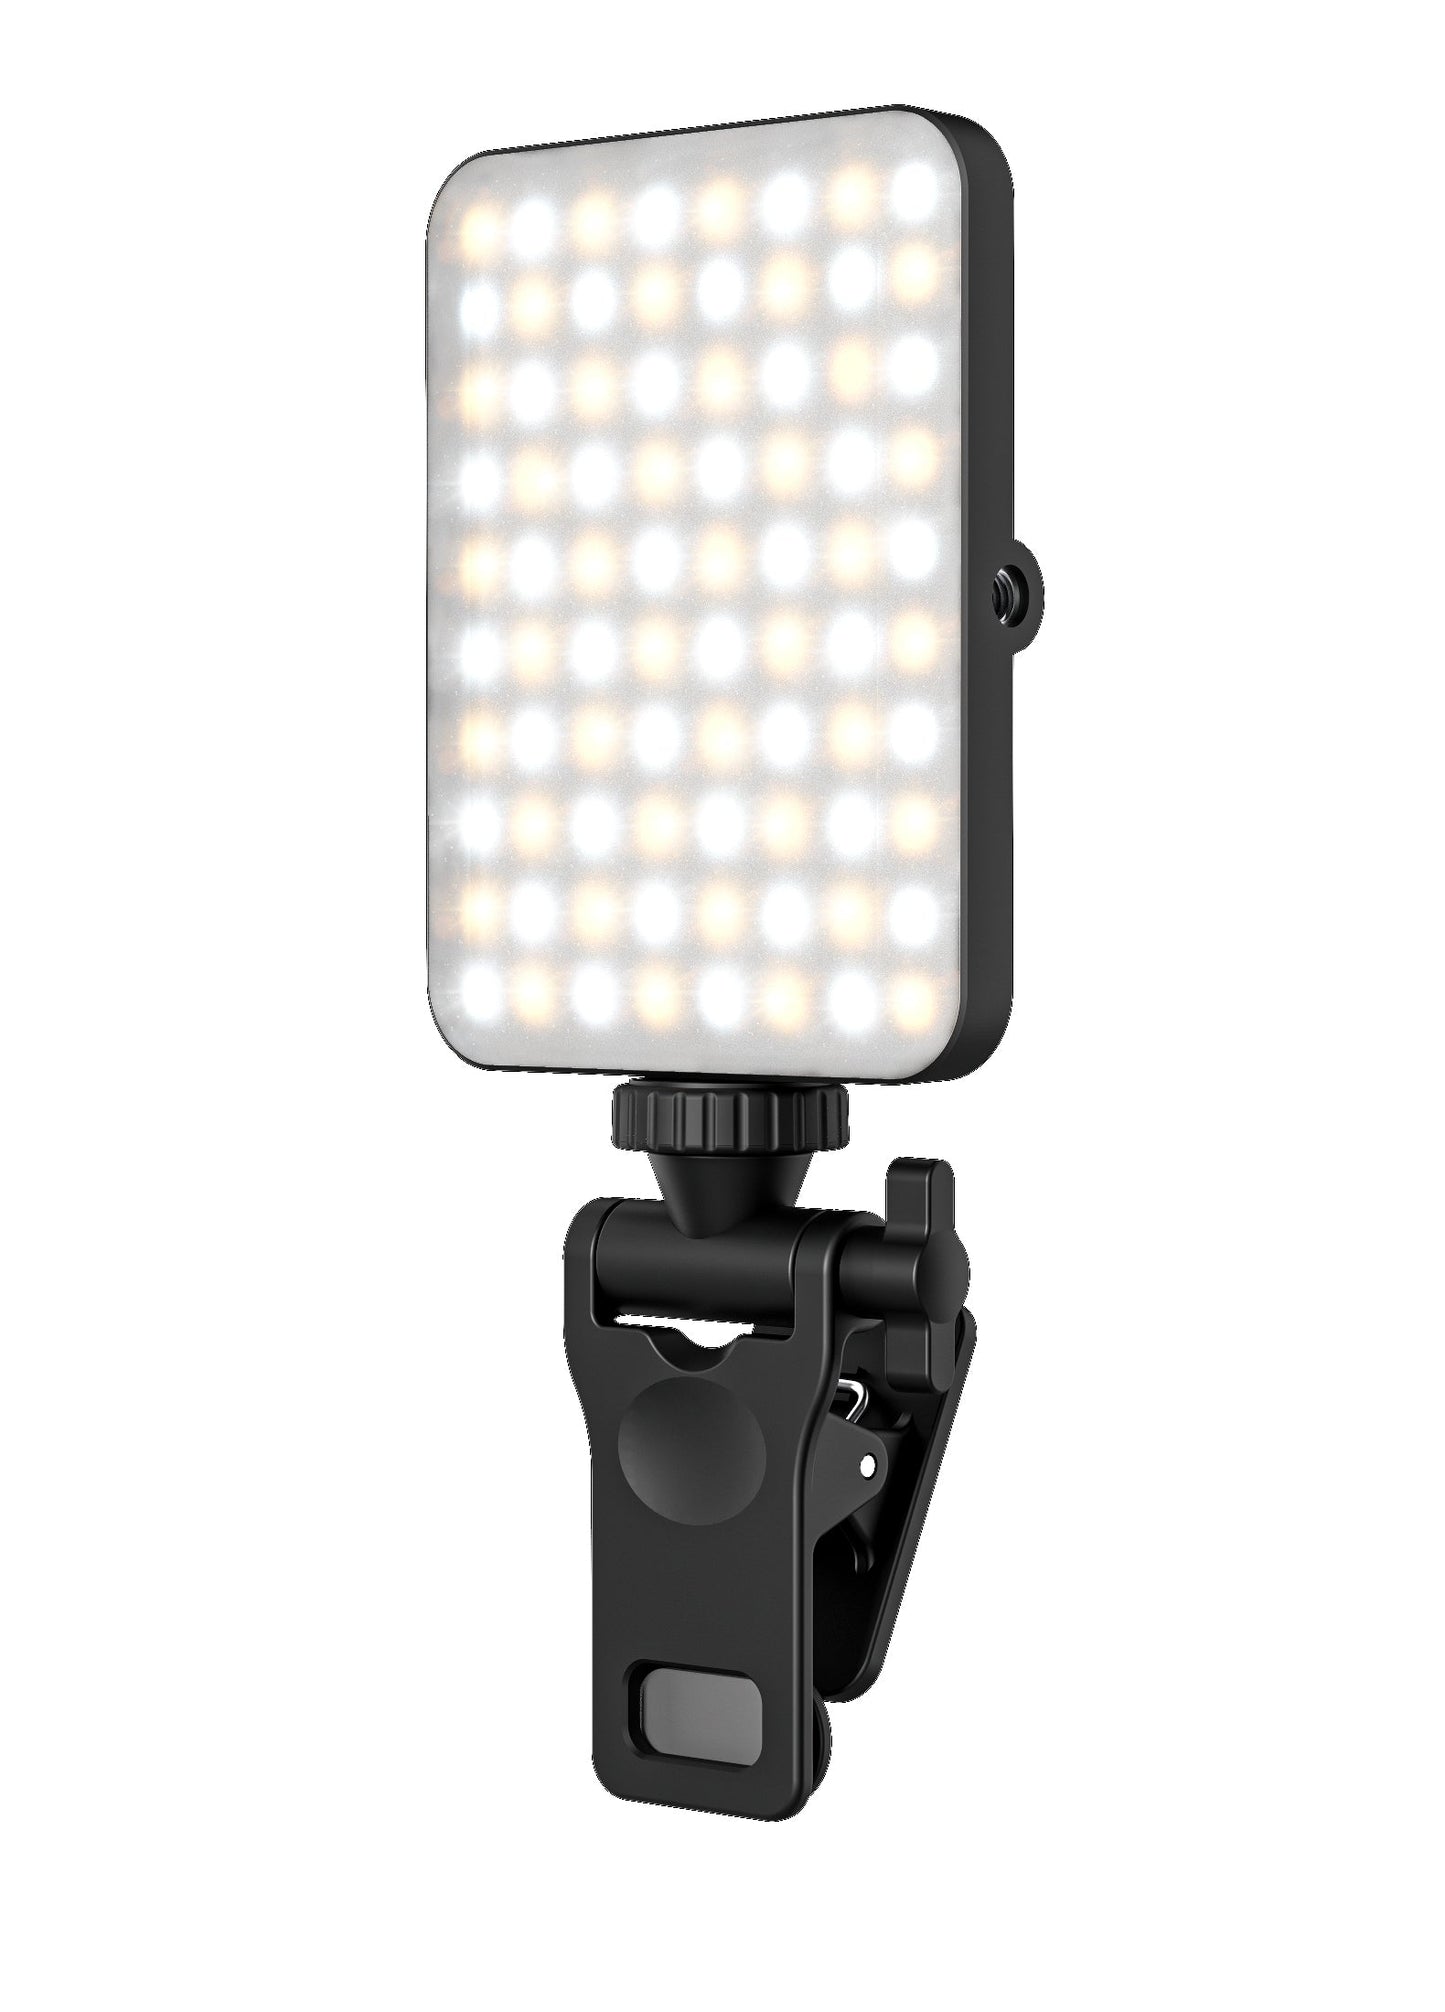 Selfie Light For Phone, Dimmable CRI95+/3 Light Modes/Built-in 2000mAh Battery for Zoom Calls/Remote Working